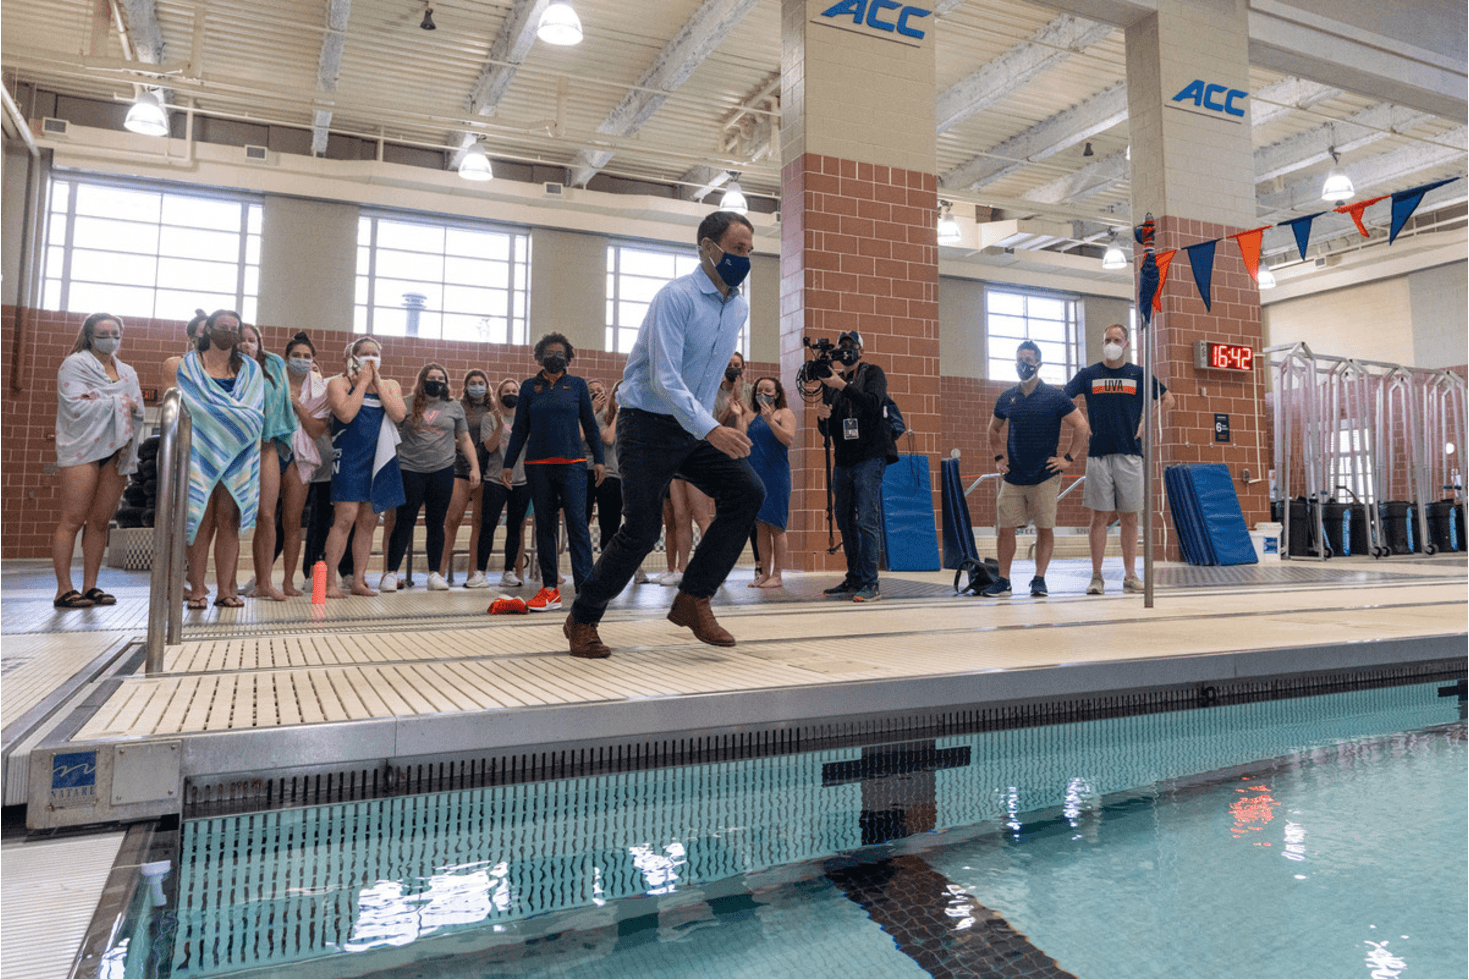 President Ryan Running towards pull while students watch